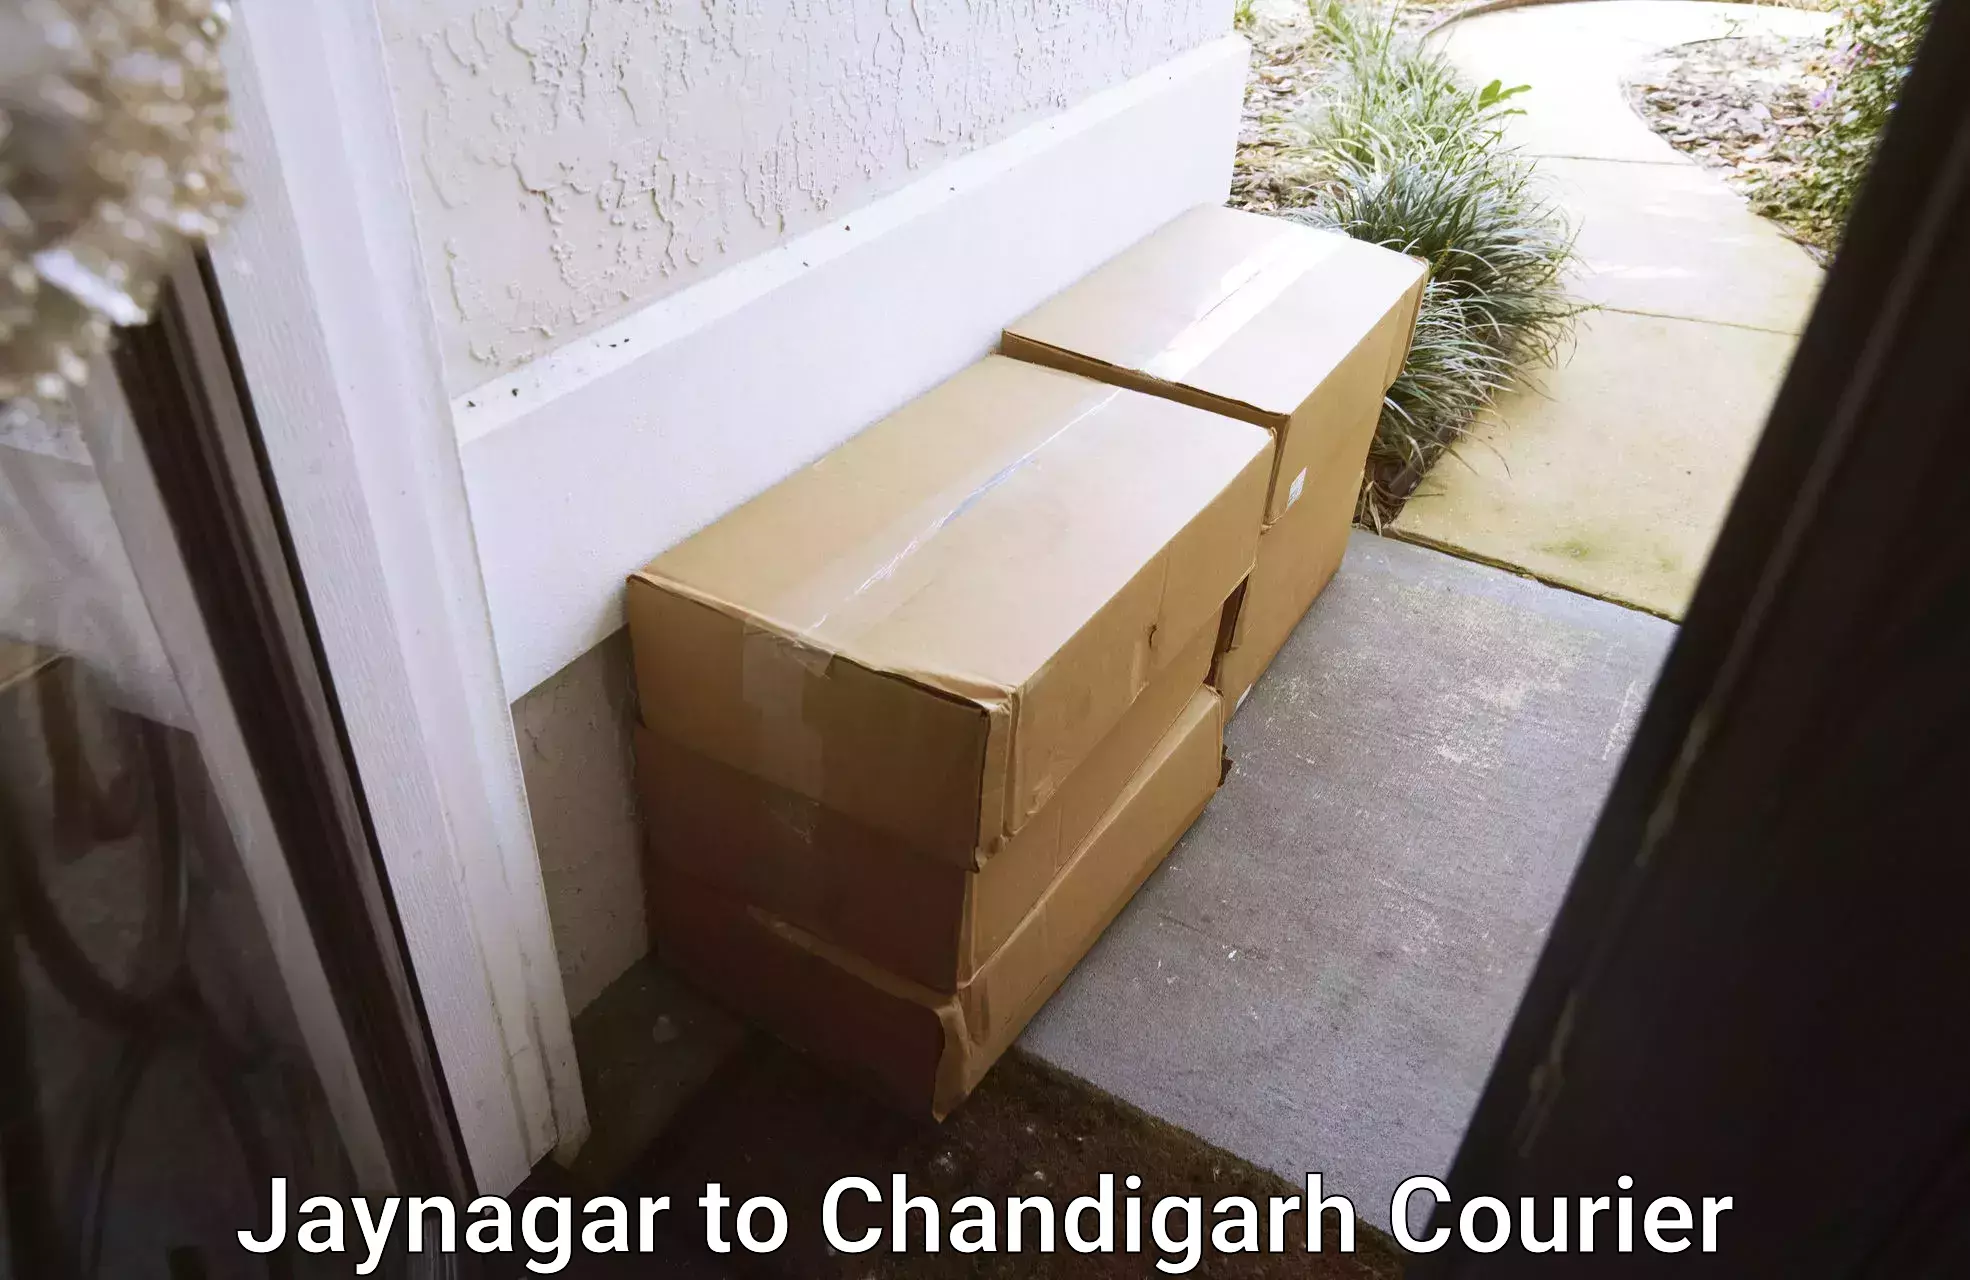 Quality moving and storage Jaynagar to Chandigarh